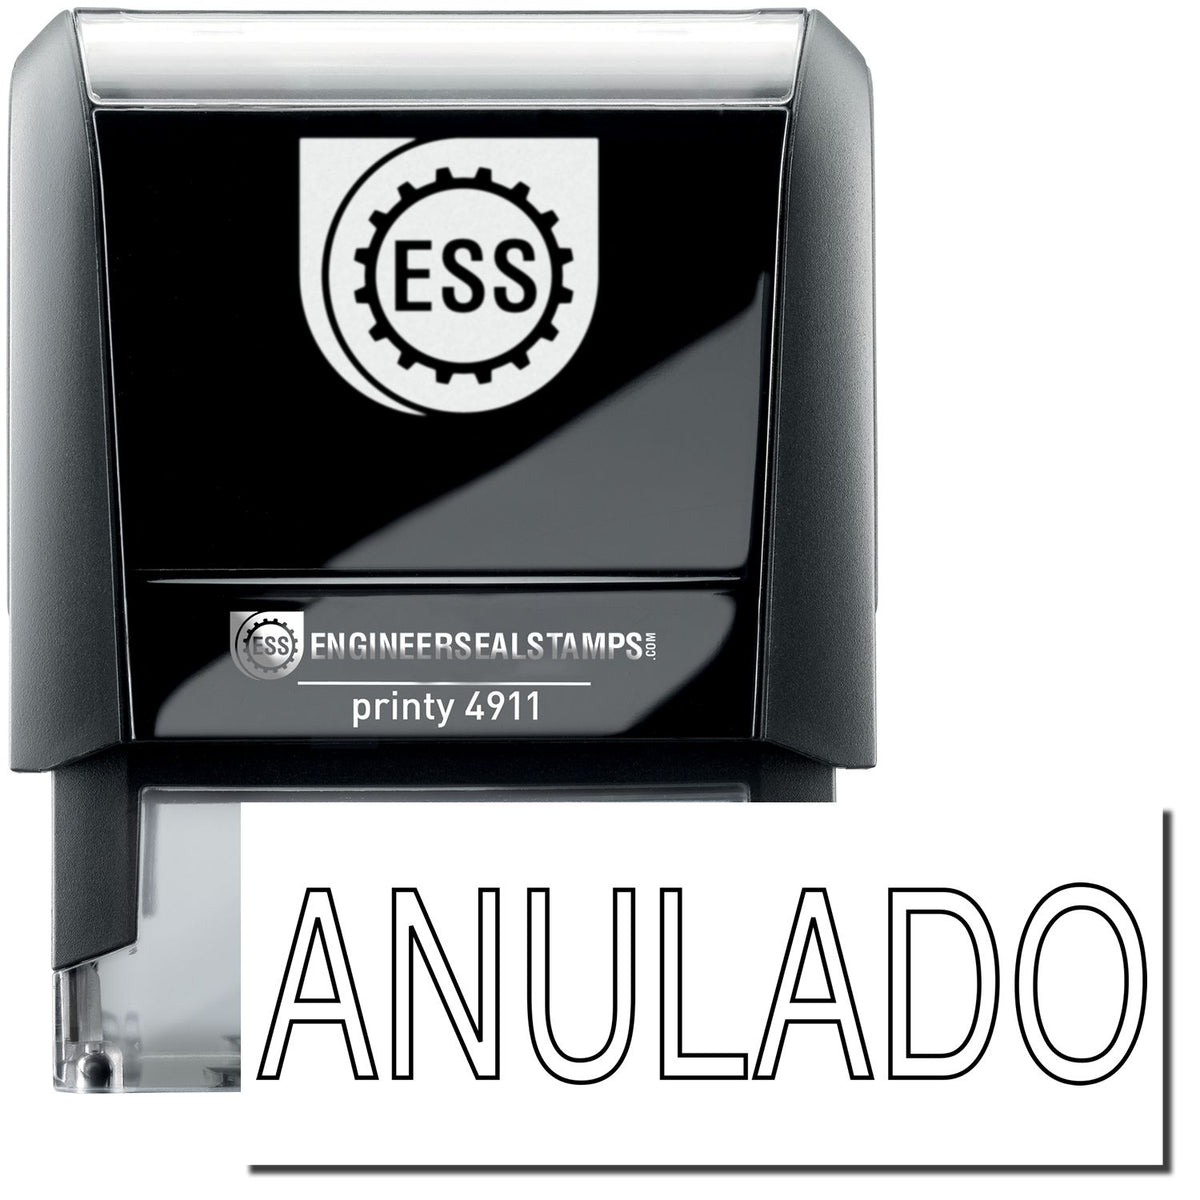 A self-inking stamp with a stamped image showing how the text &quot;ANULADO&quot; in an outline style is displayed after stamping.